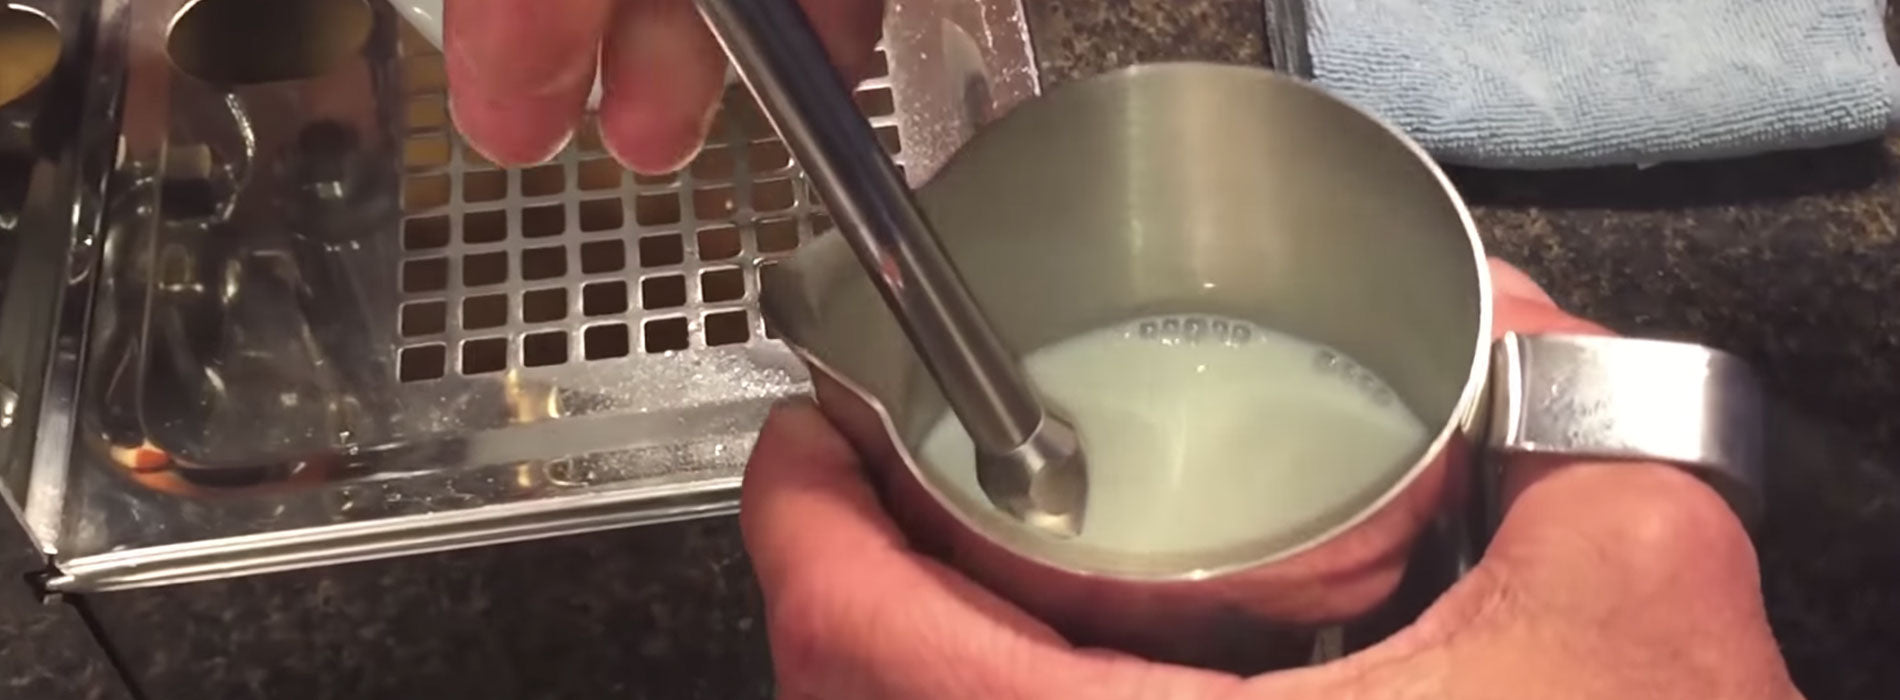 How To Steam Milk With Steam Wand 